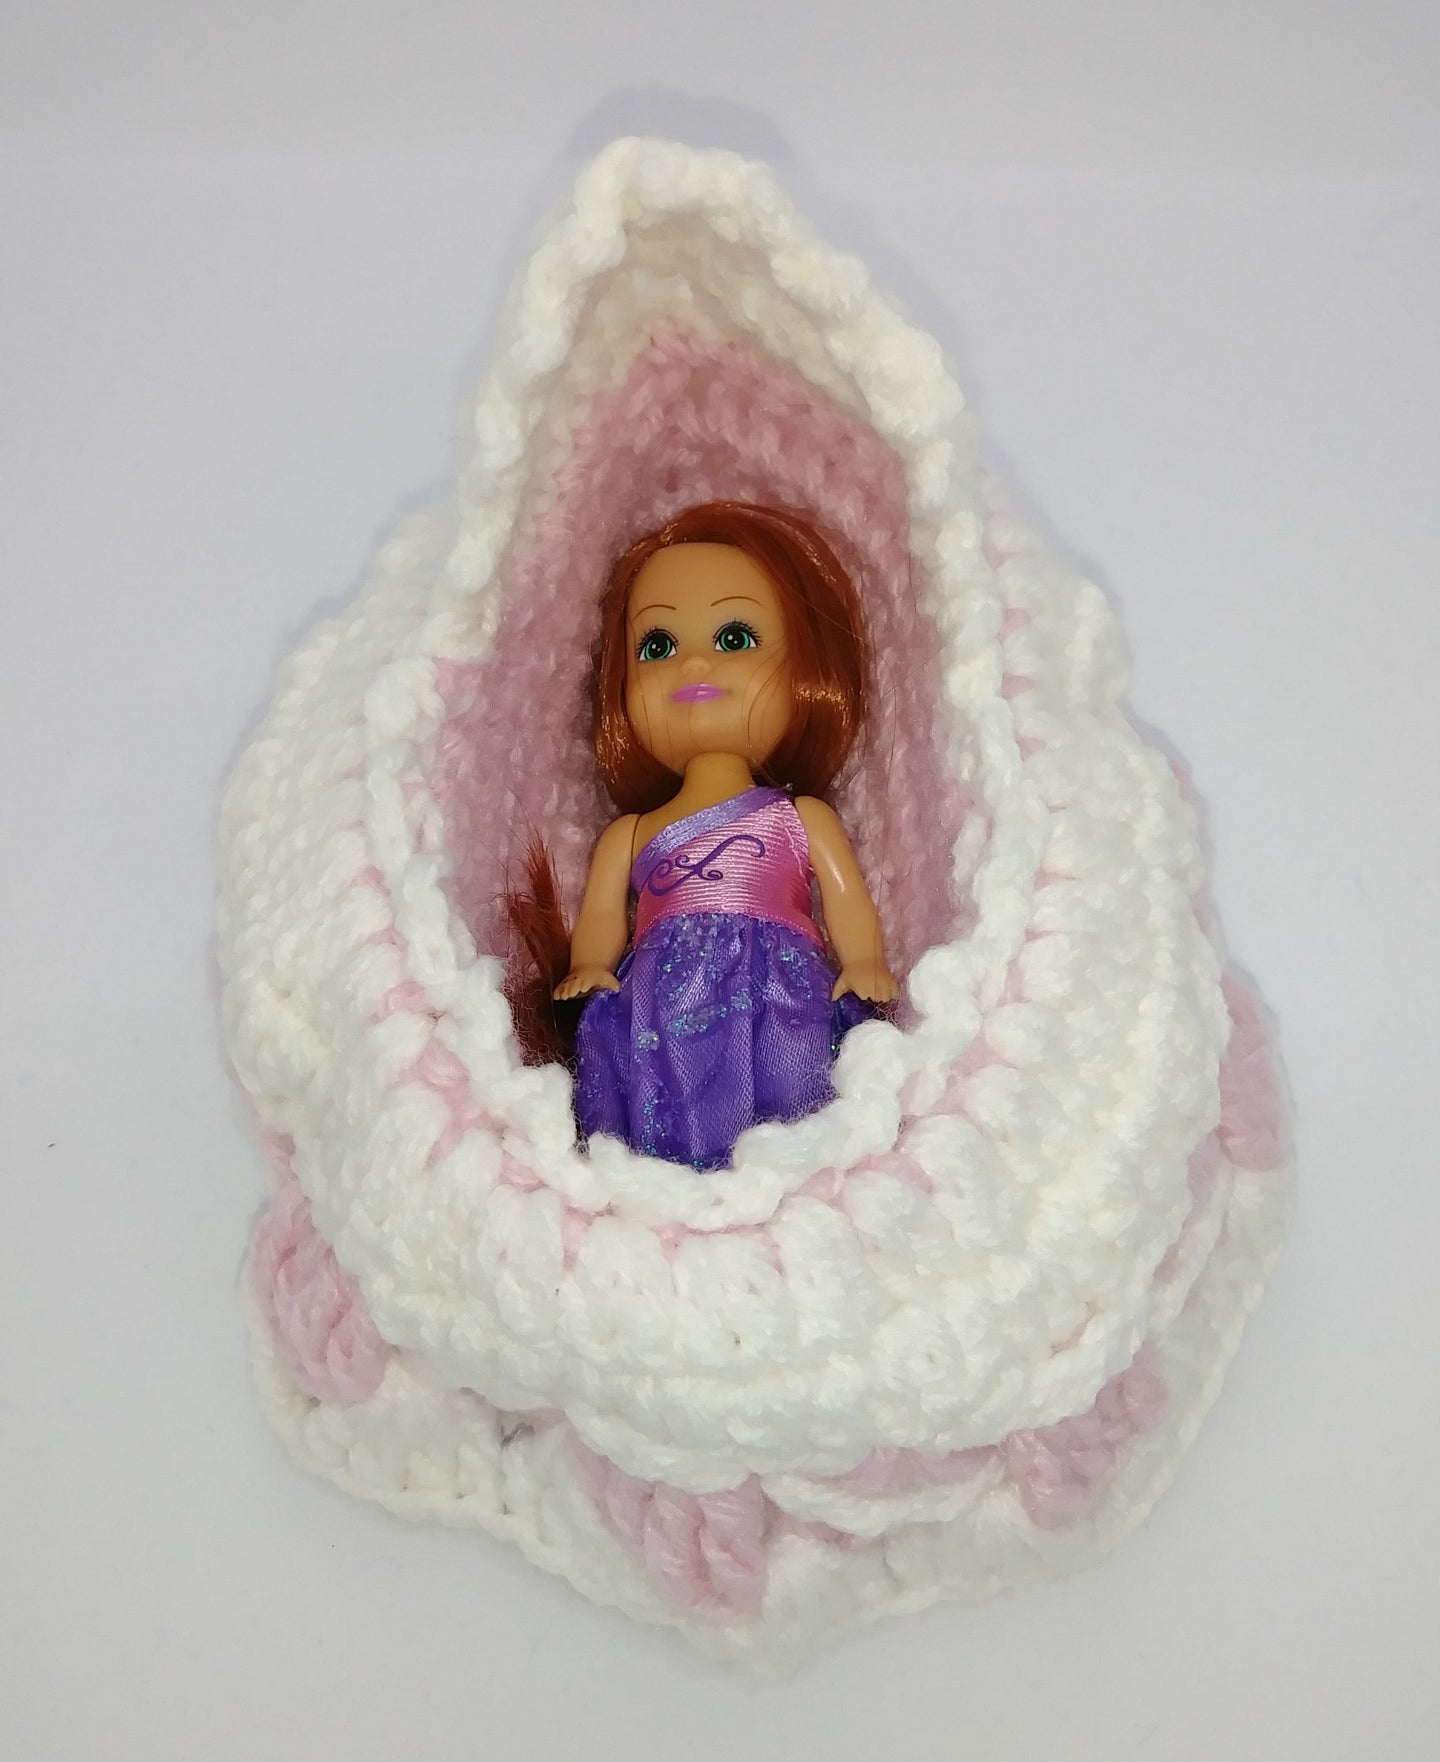 Little Girl's Bassinette Purse With Doll